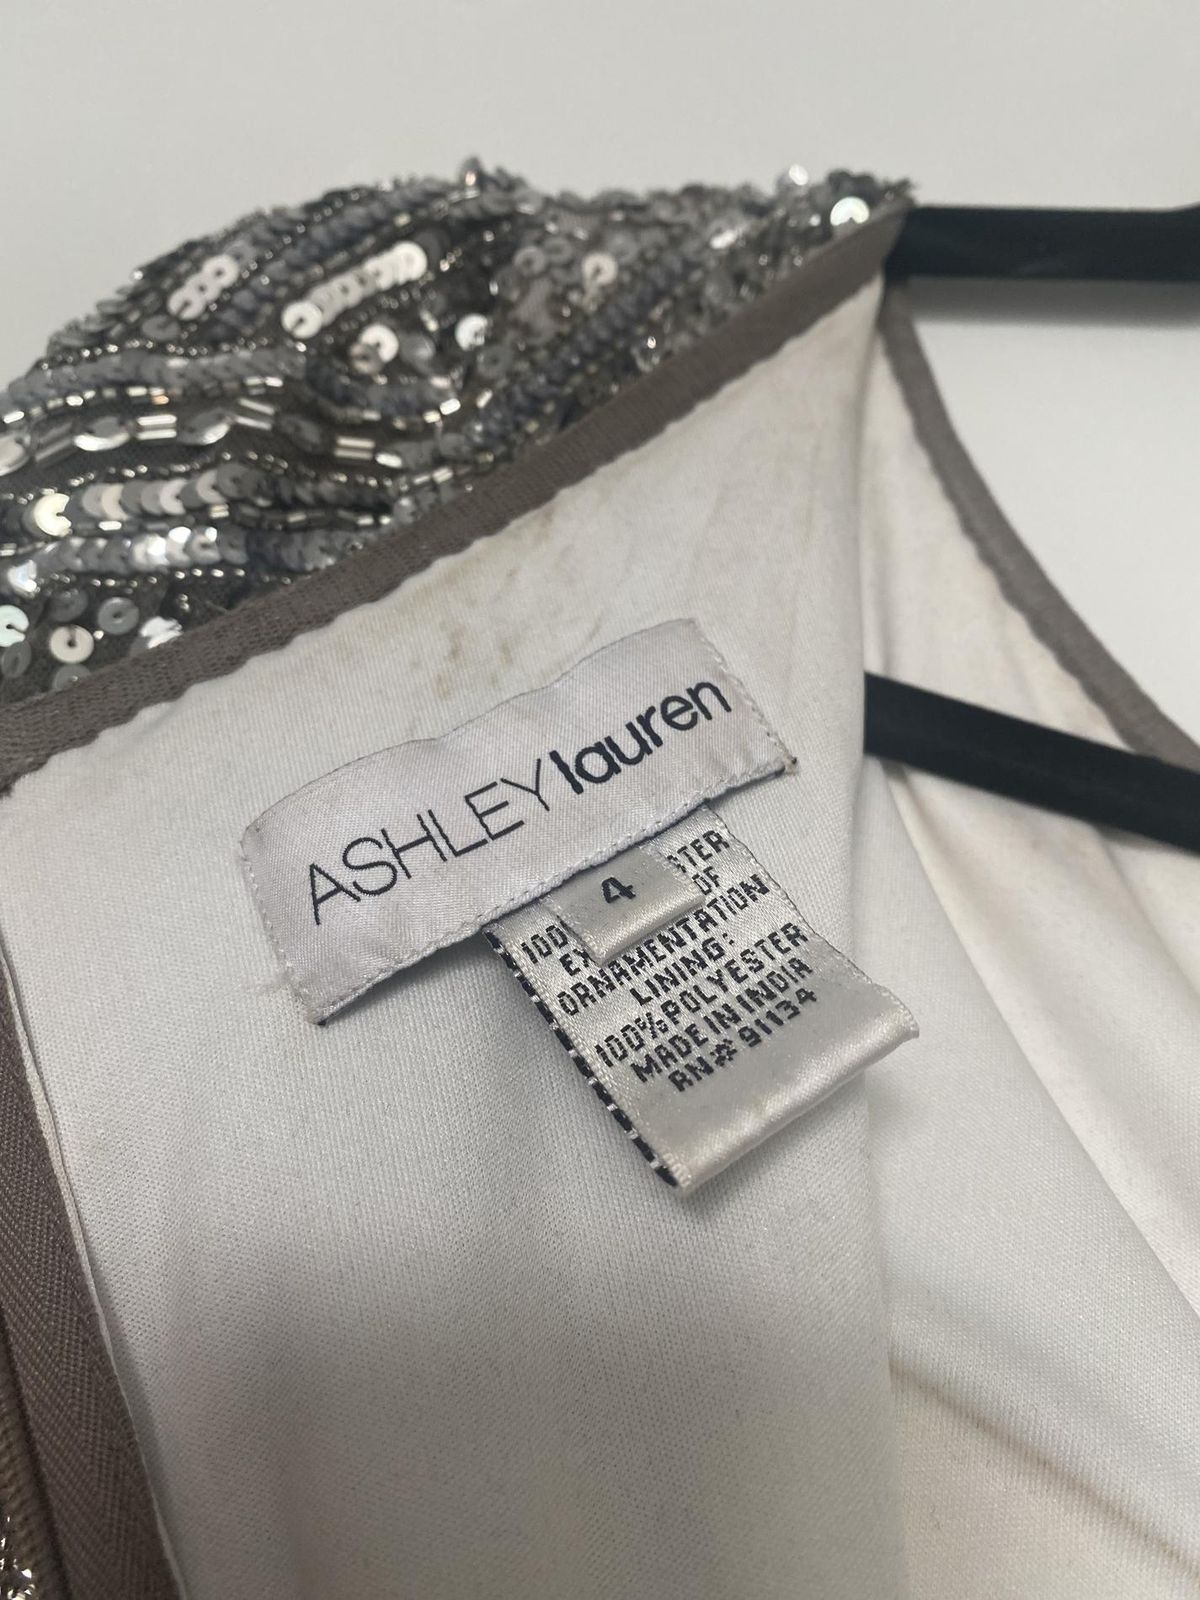 Ashley Lauren Size 4 Homecoming Long Sleeve Silver Cocktail Dress on Queenly